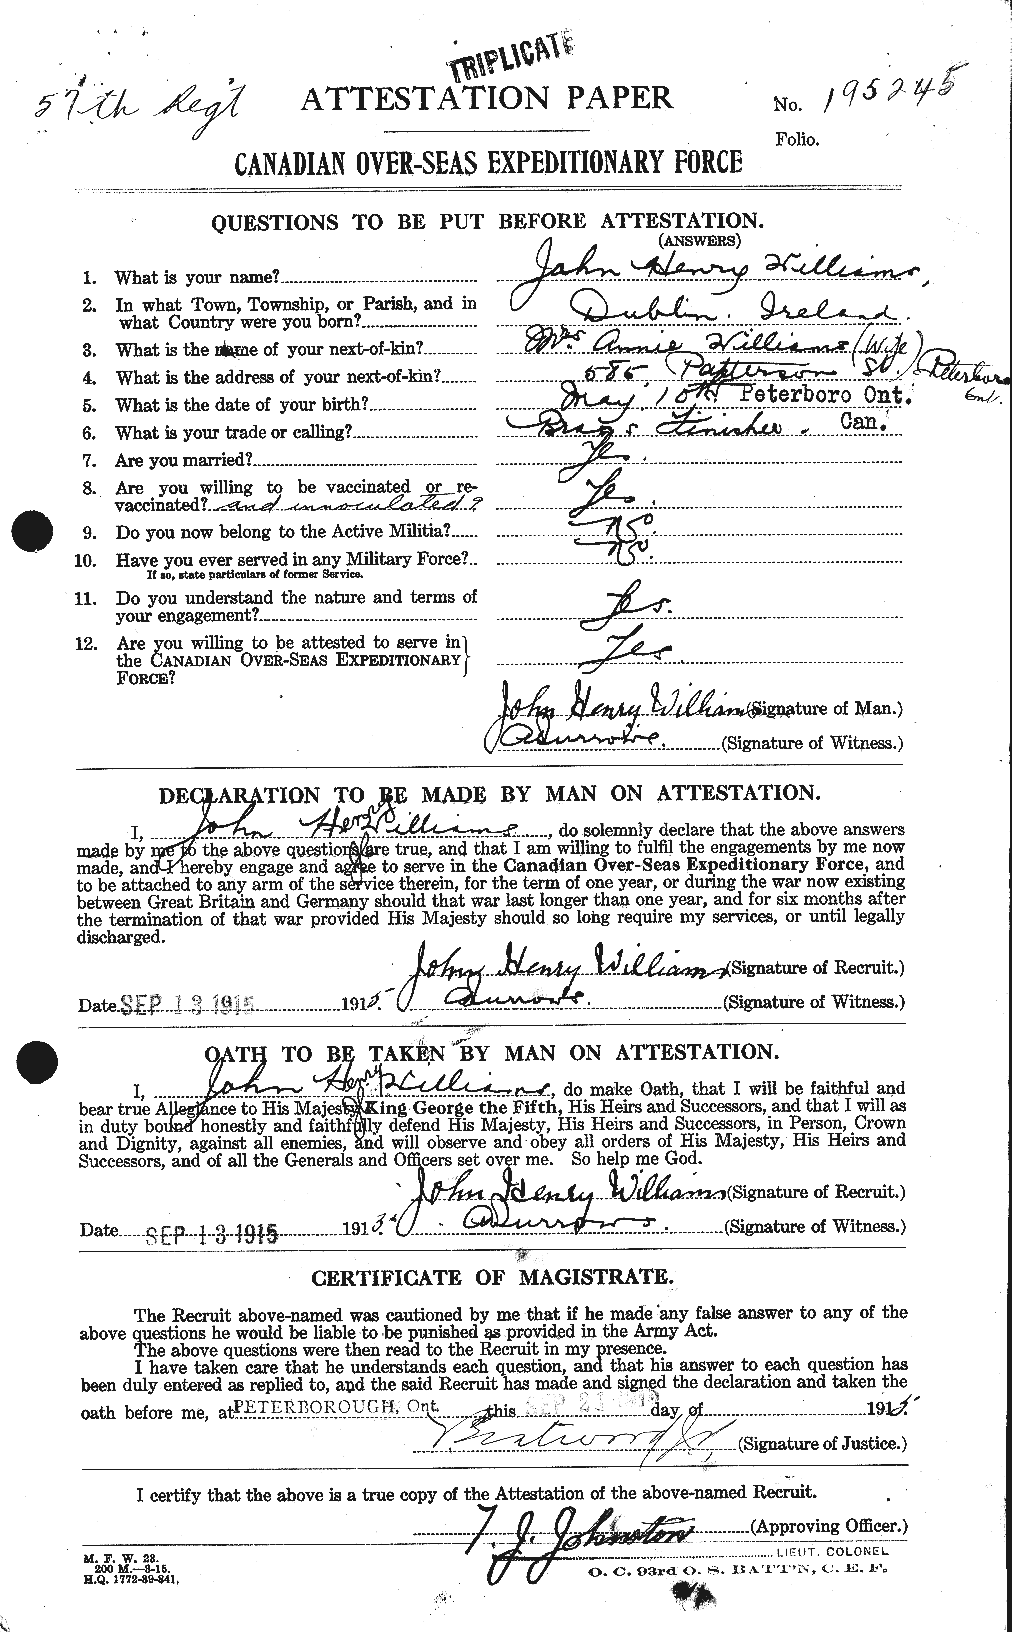 Personnel Records of the First World War - CEF 673002a